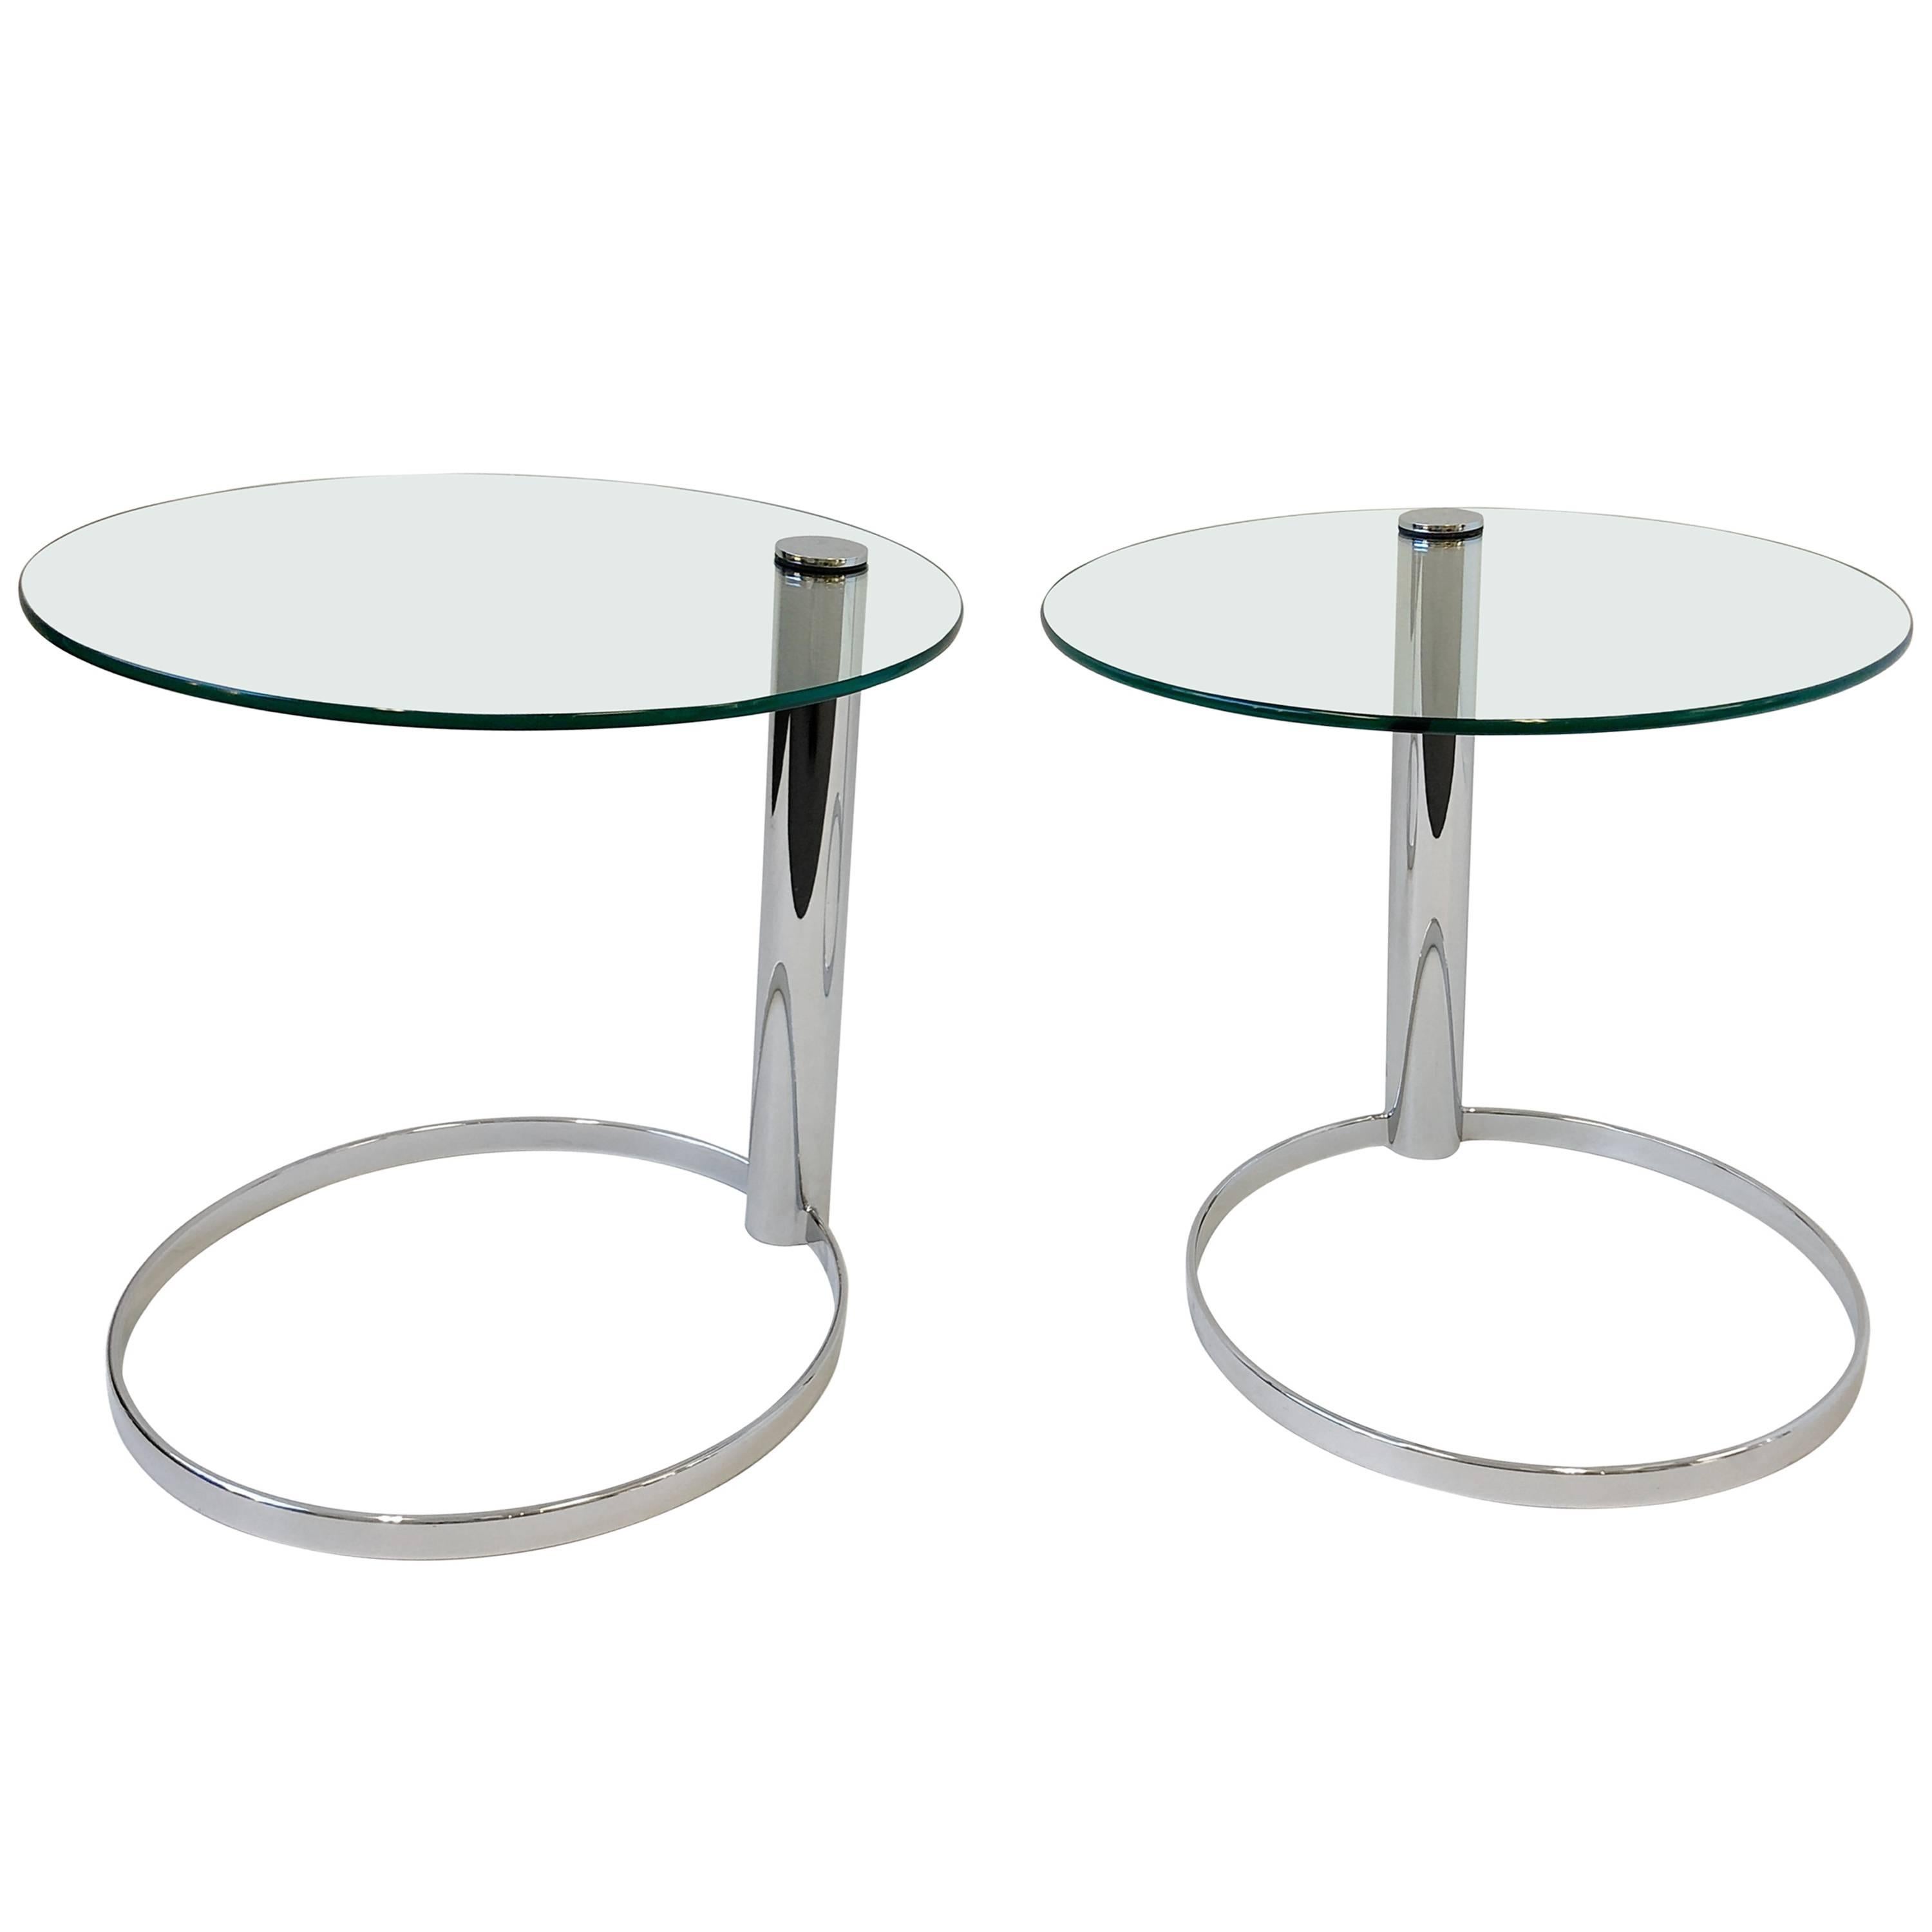 Pair of Chrome and Glass Side Tables by John Mascheroni for Swaim